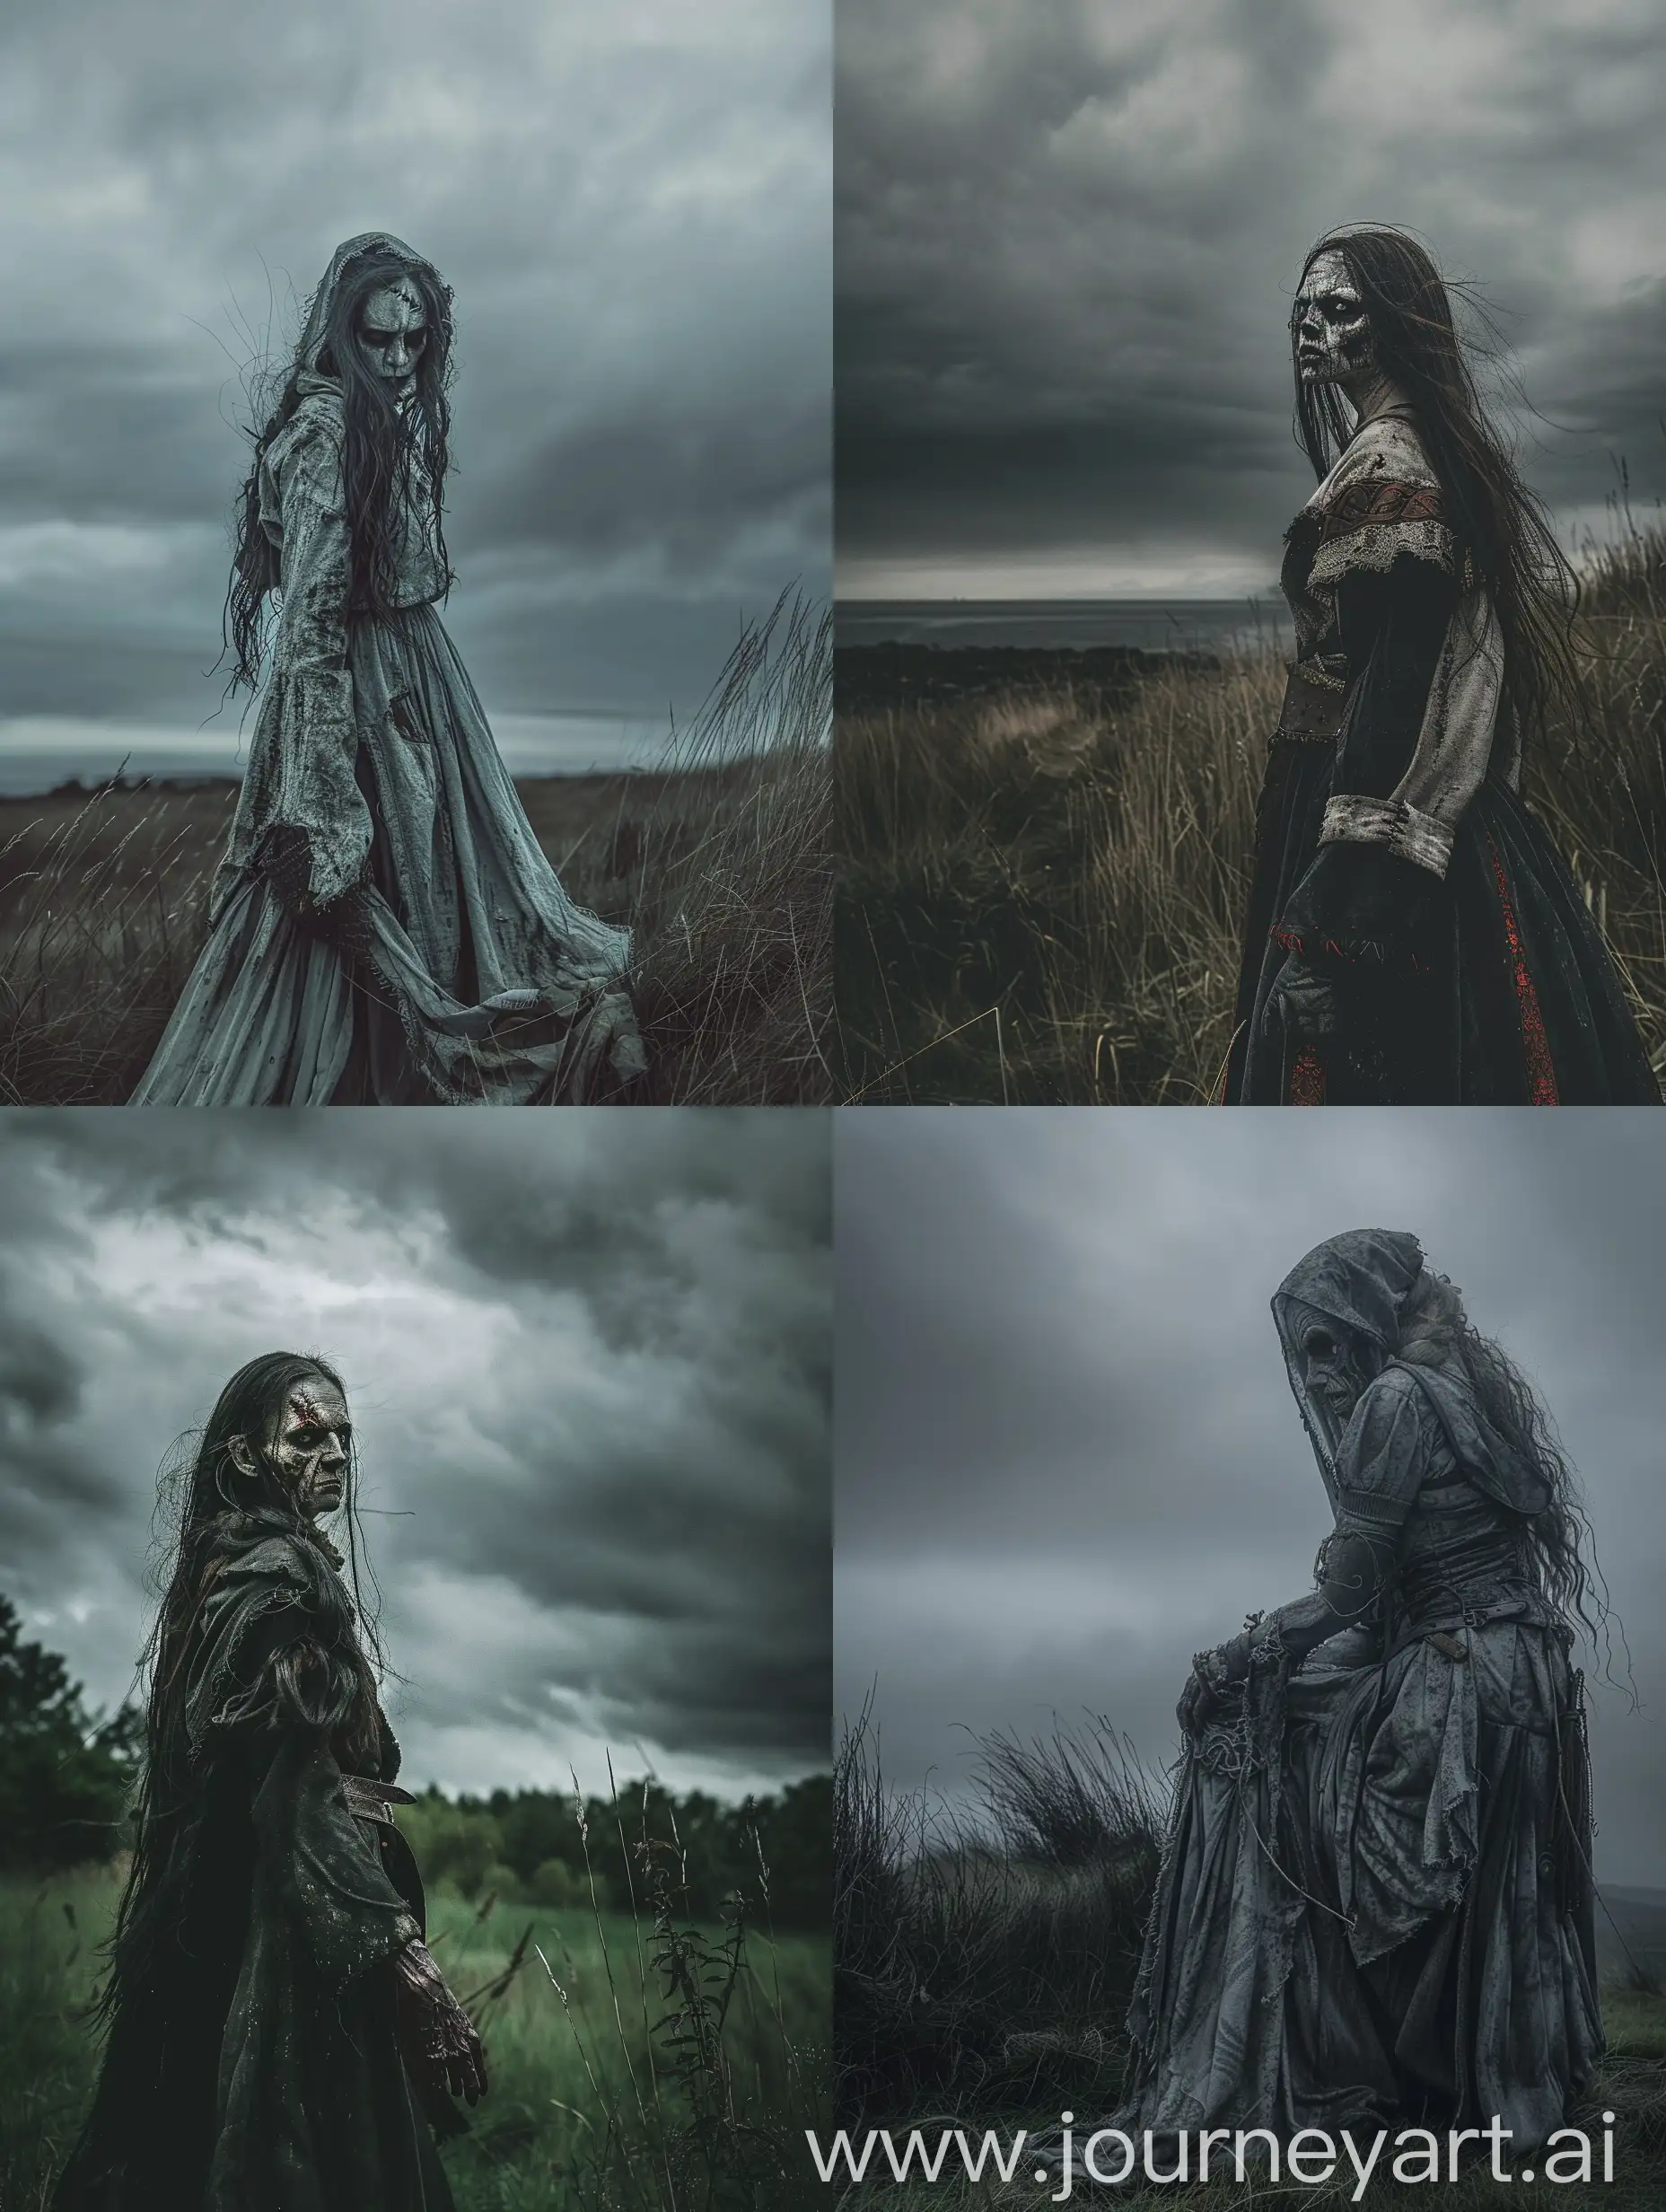 Undead Viking witch, folk horror, overcast ominous atmosphere, sense of fear and dread, creative camera angles, epic composition, ultra detailed award winning photography shot on a 14mm prime lens, grim horror